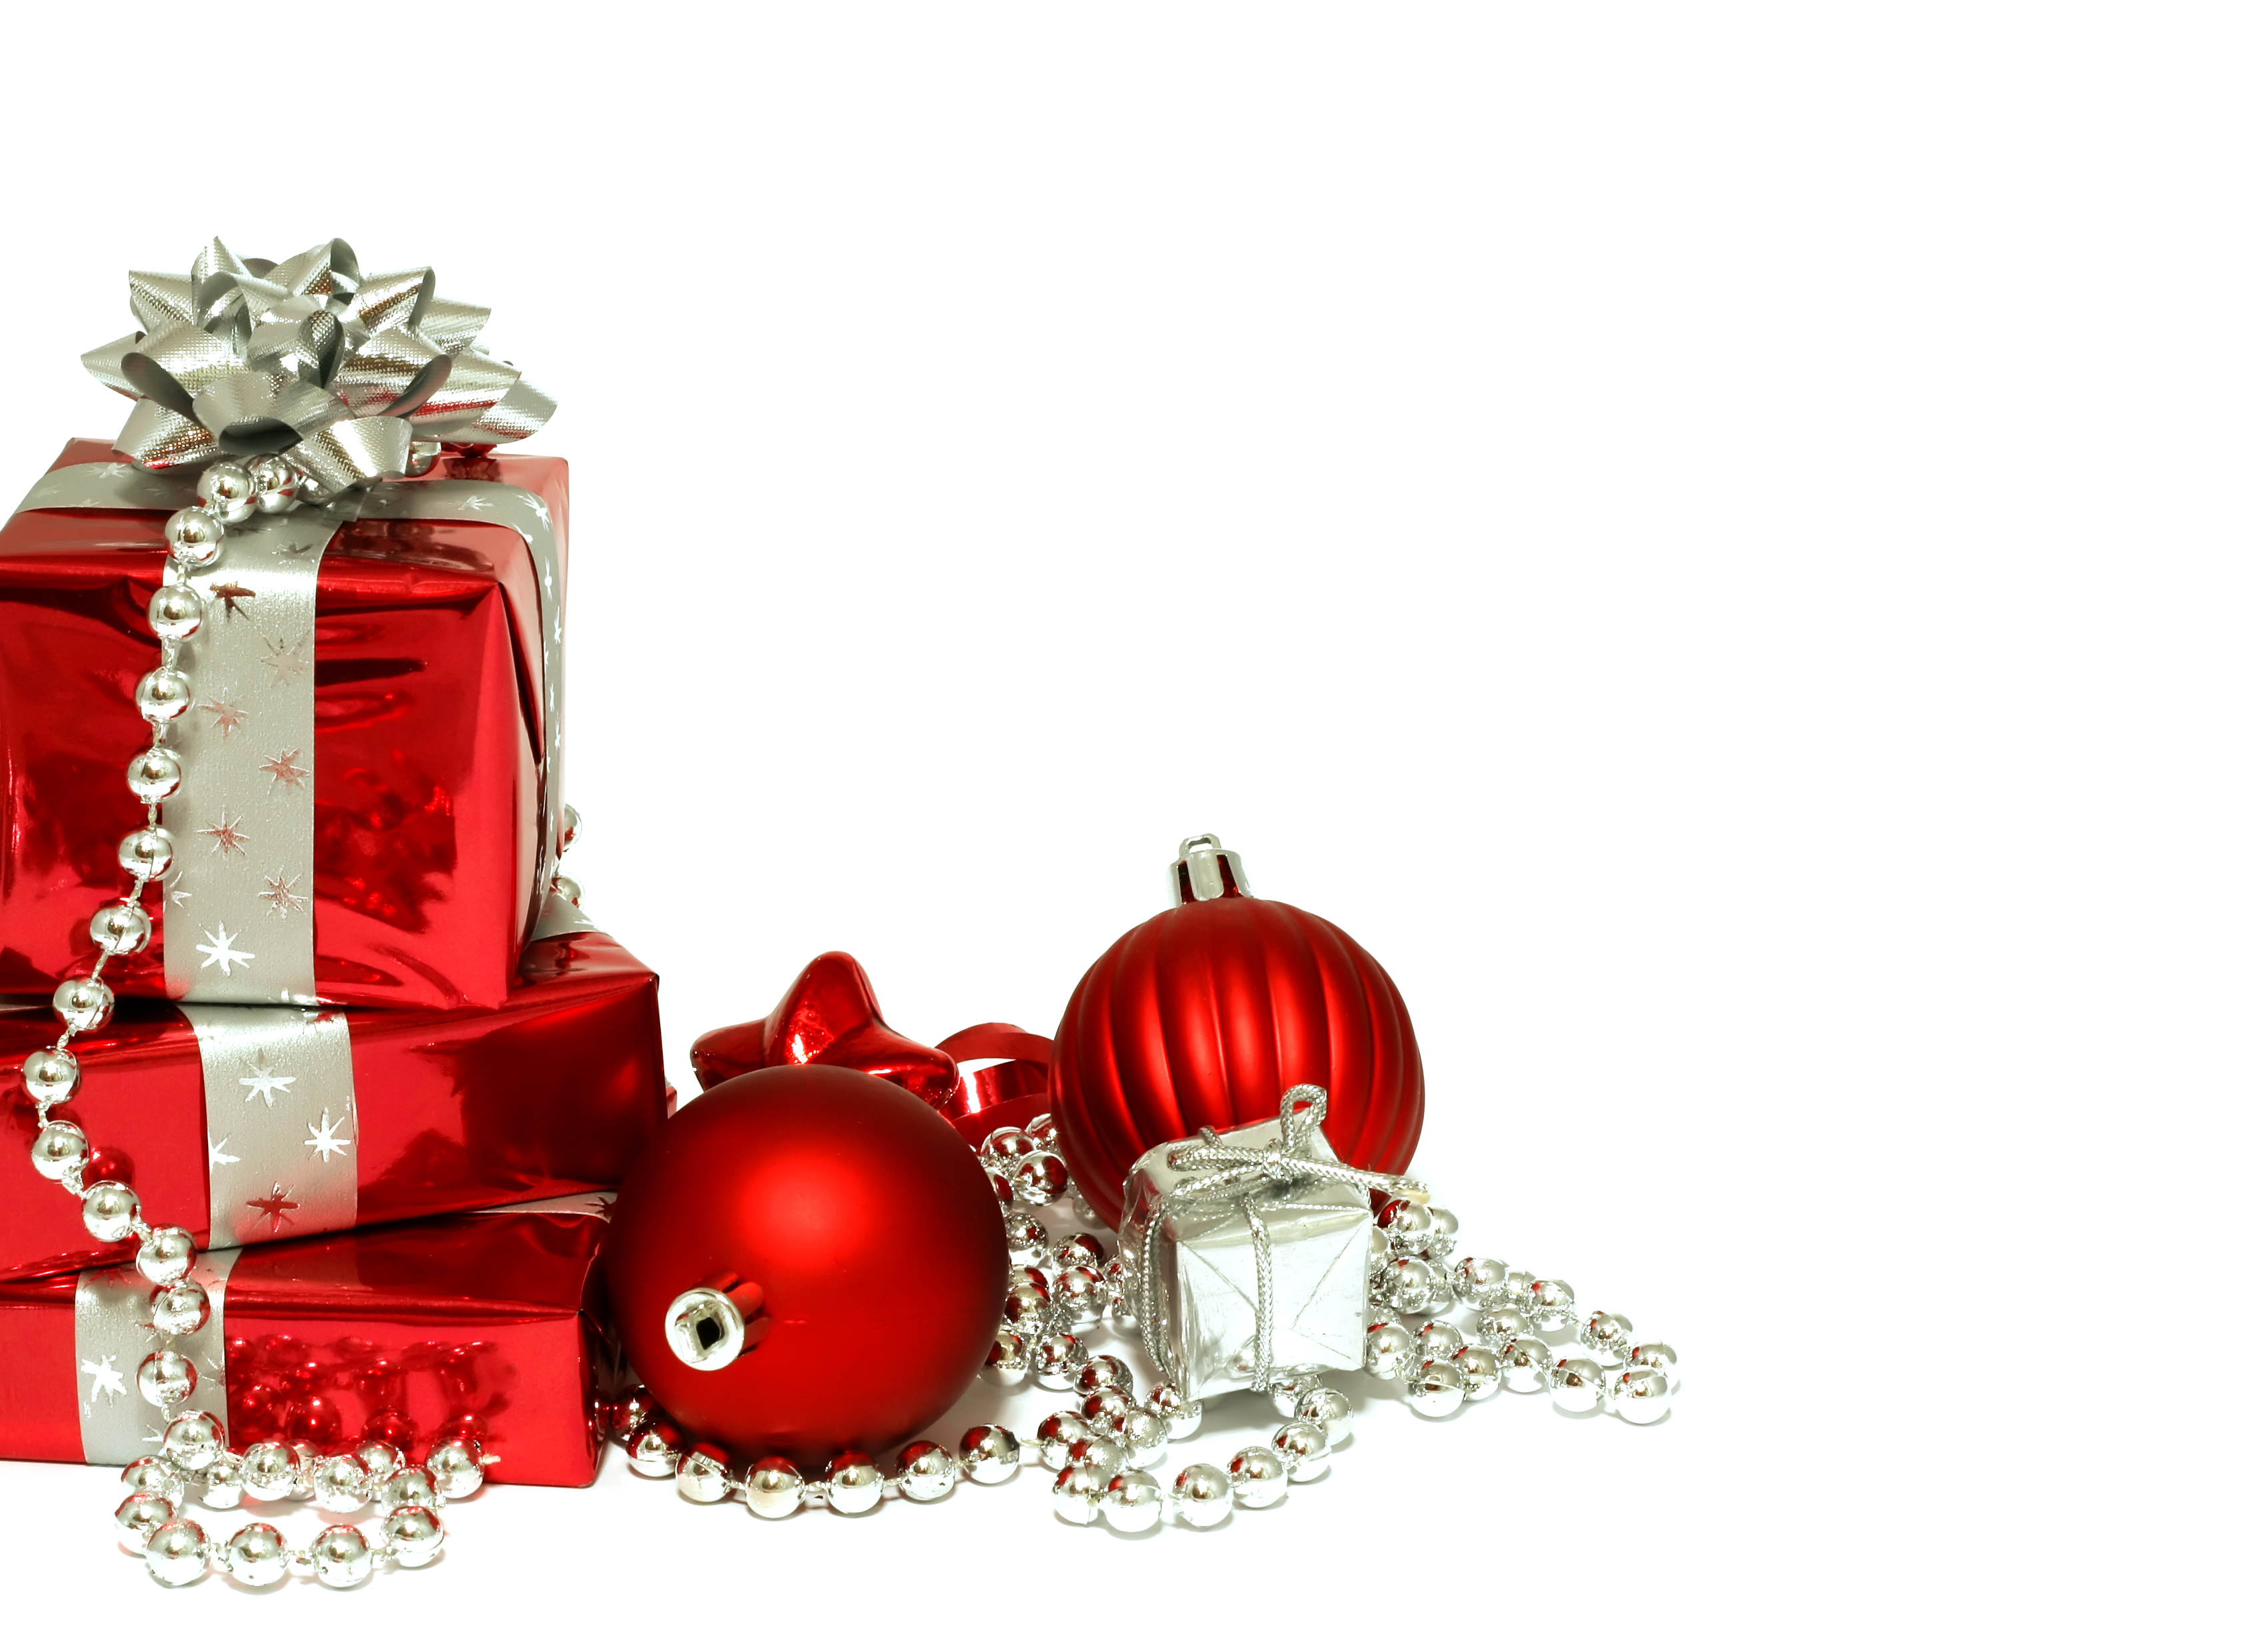 Red Christmas Decorations And Gifts On White Background Quote